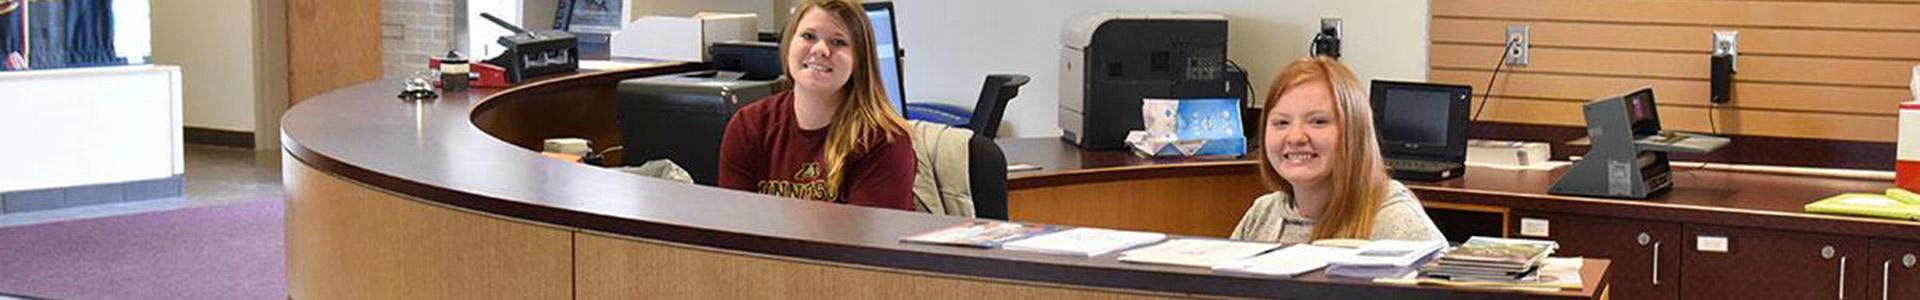 Two students sitting at the Information Desk in Sargeant Student Center